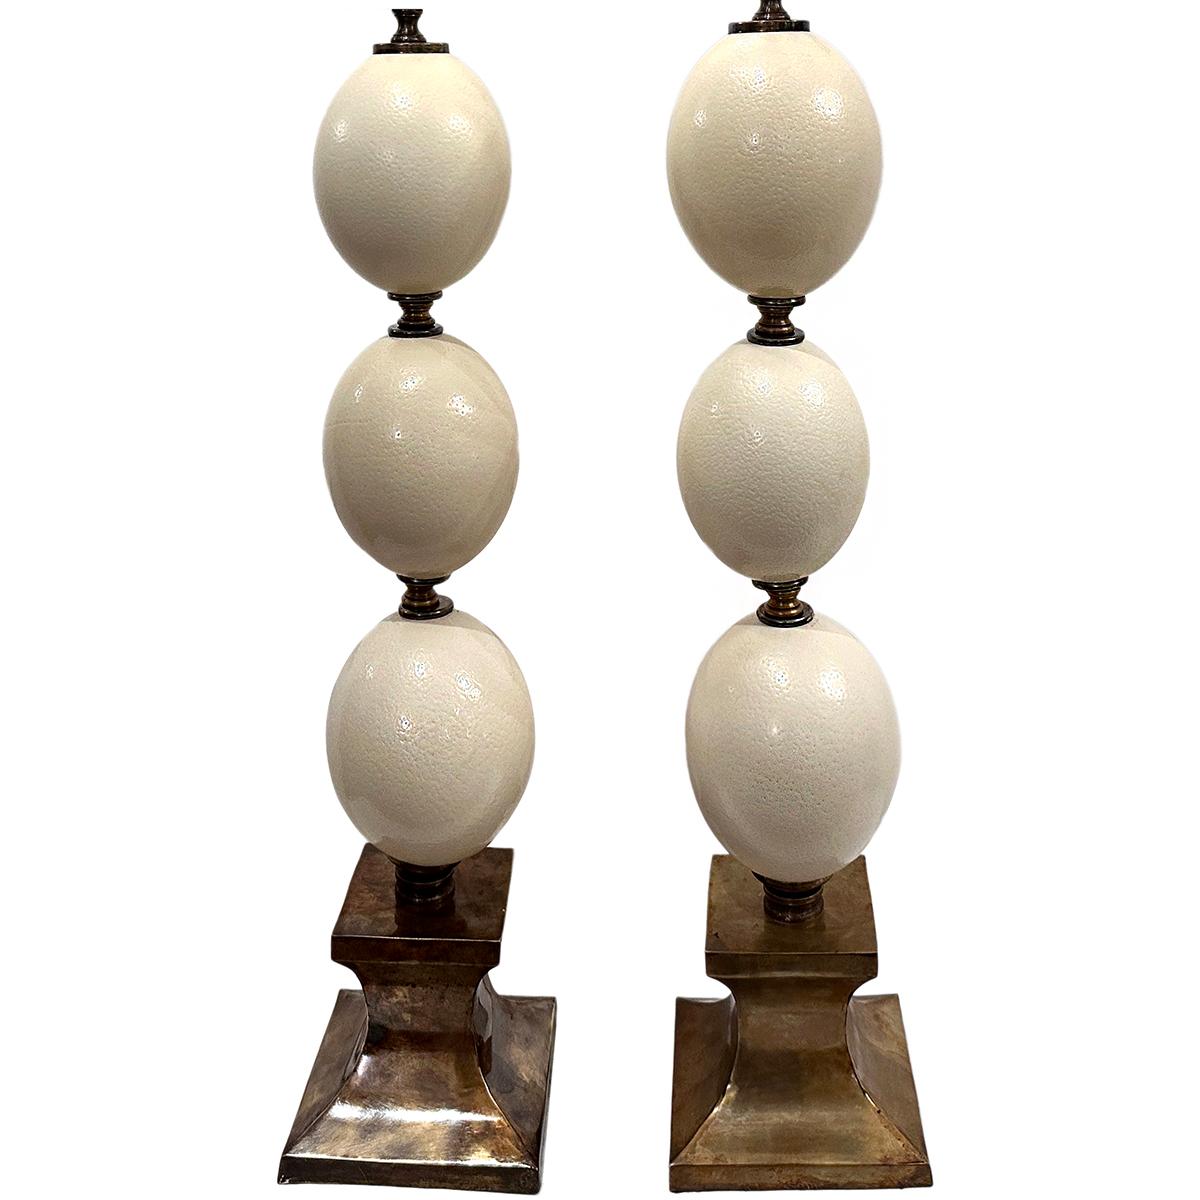 Pair of circa 1960's French patinated bronze ostrich egg table lamps.

Measurements:
Height of body: 27